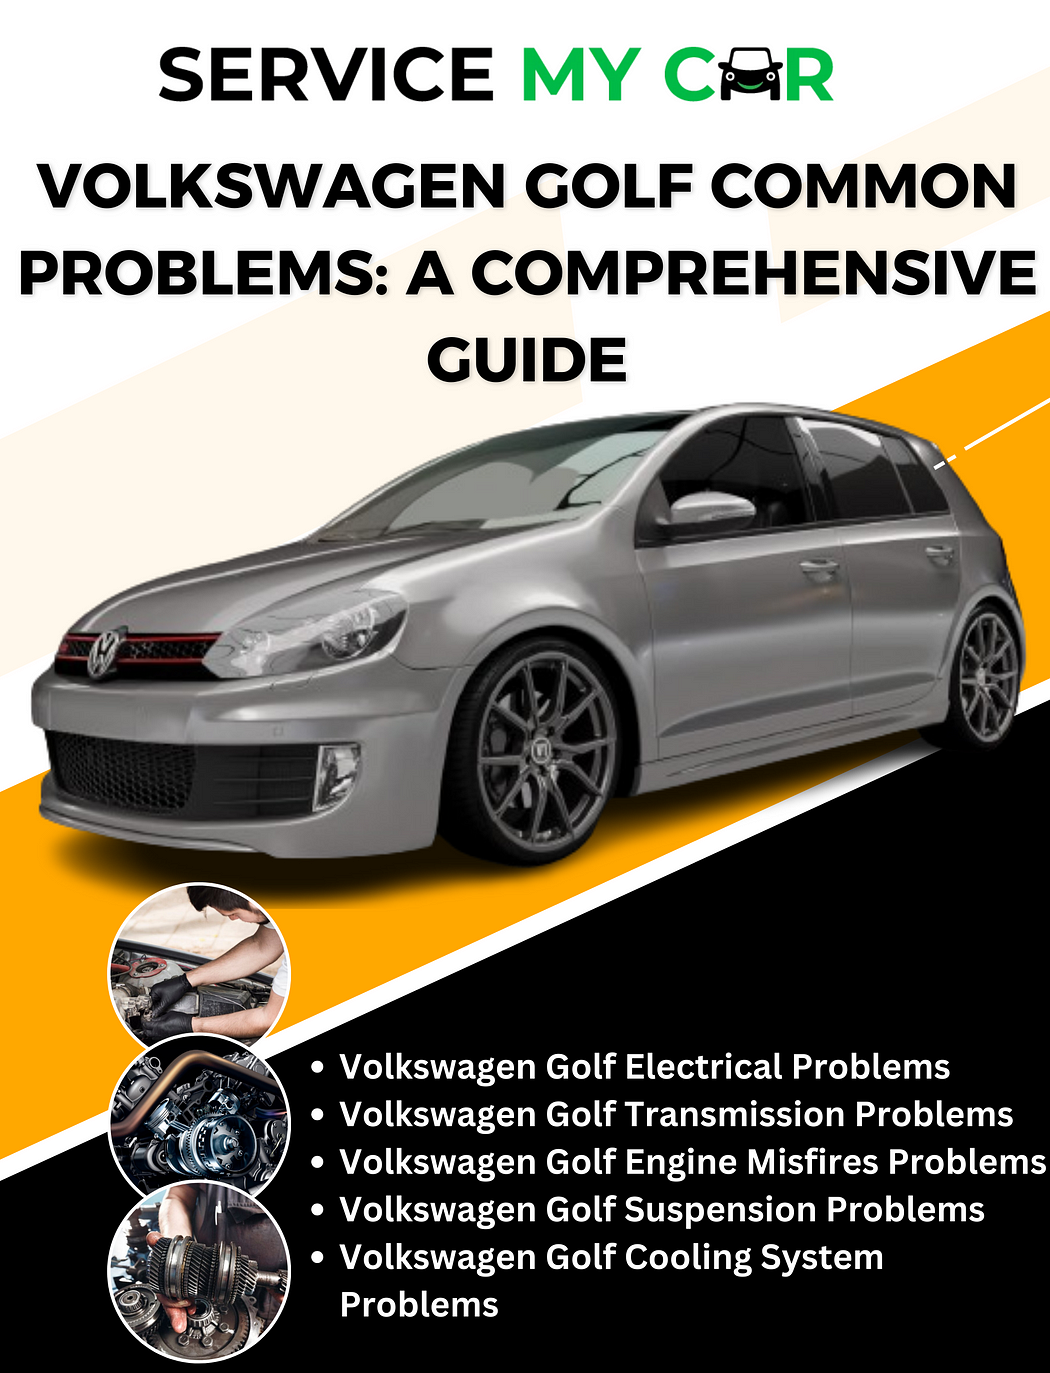 Volkswagen Golf Common Problems: A Comprehensive Guide